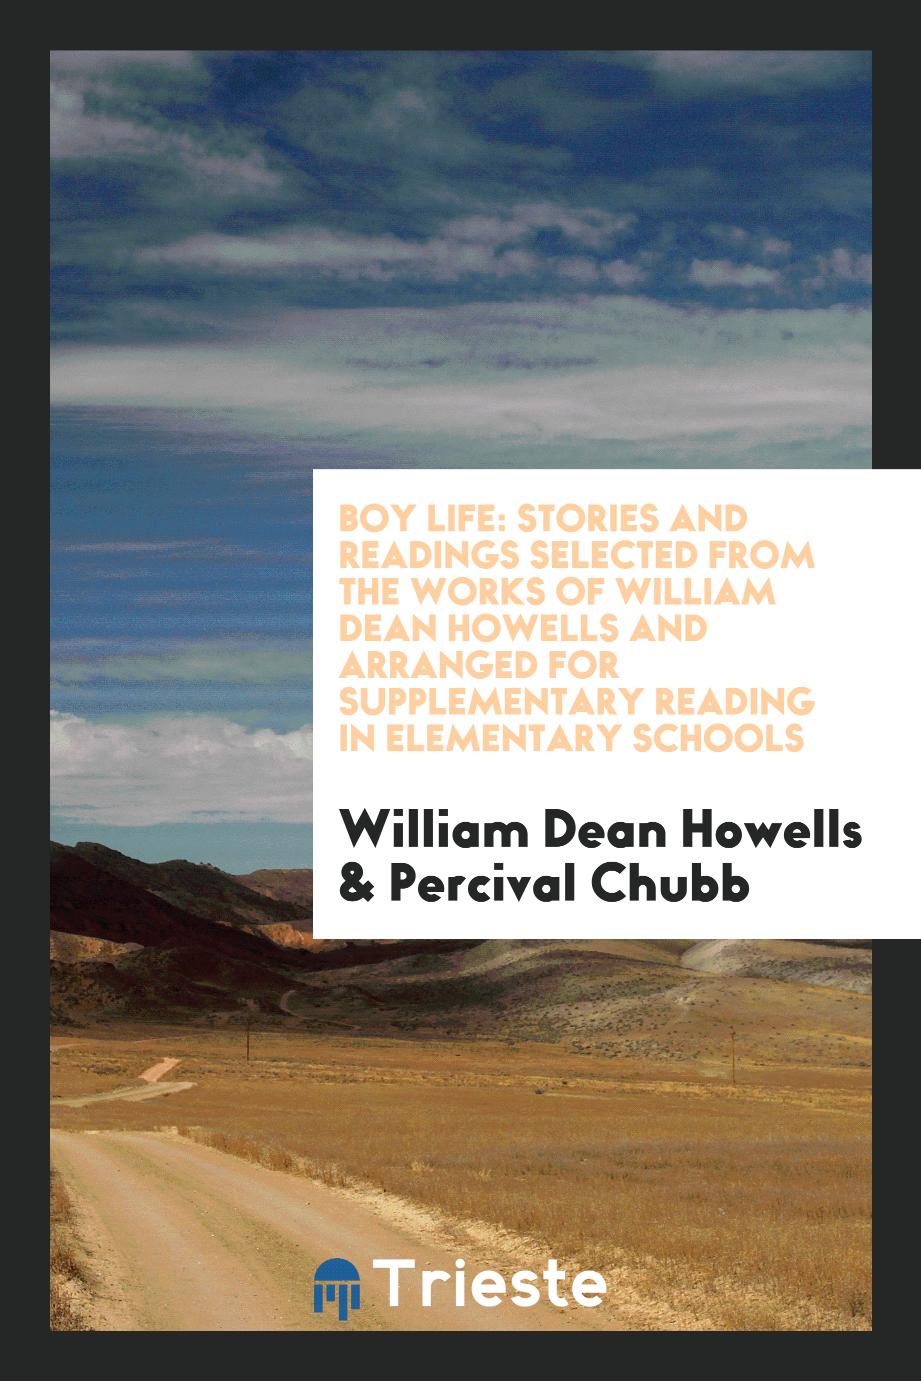 Boy Life: Stories and Readings Selected from the Works of William Dean Howells and Arranged for Supplementary Reading in Elementary Schools